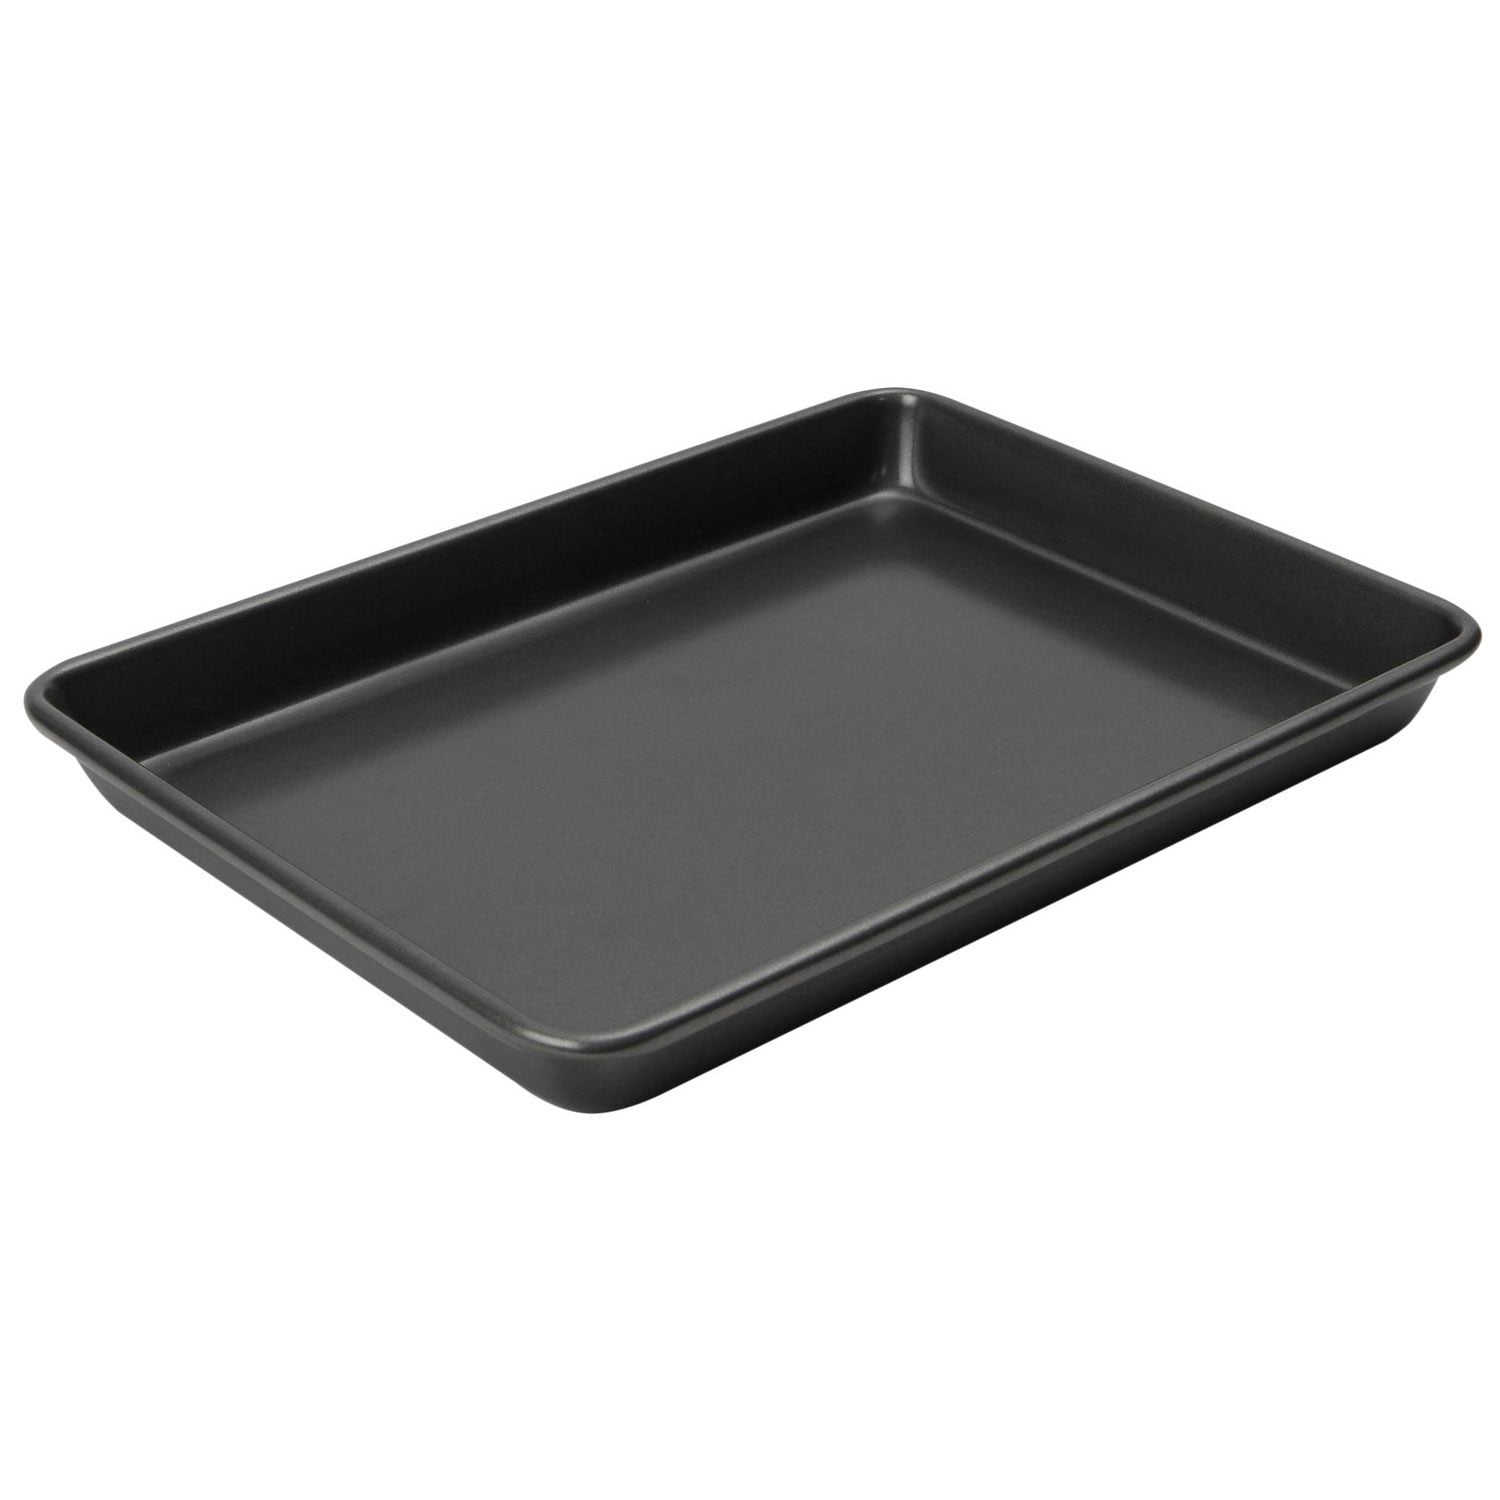 Amazon.com: Hemoton Oven Tray Oven Tray Cake Baking Pans Baking Pan Carbon  Steel 6 Compartment Nonstick Bakeware Square Baking Tray for Restaurant  Home Kitchen Square Griddle Square Cake Pan Square Cake Pan: